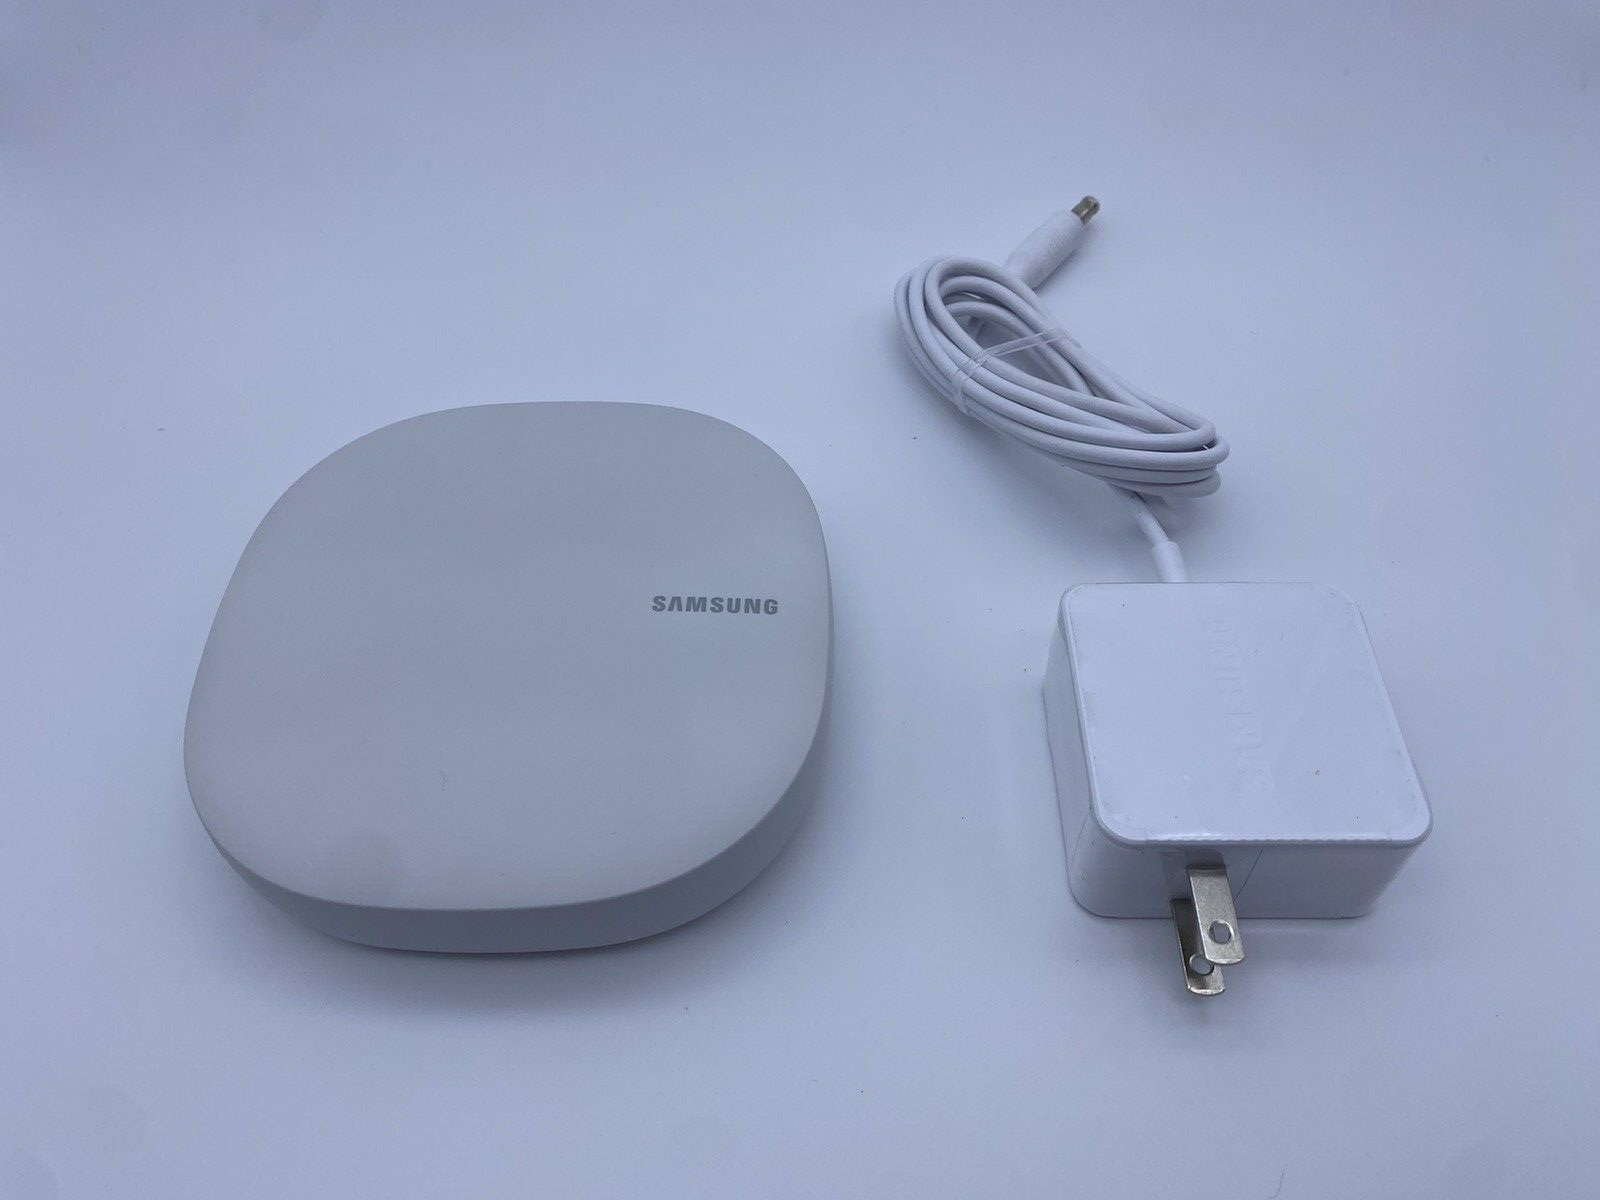 Samsung Connect Home AC1300 ET-WV520 Smart Wireless-Wi-Fi Router, 